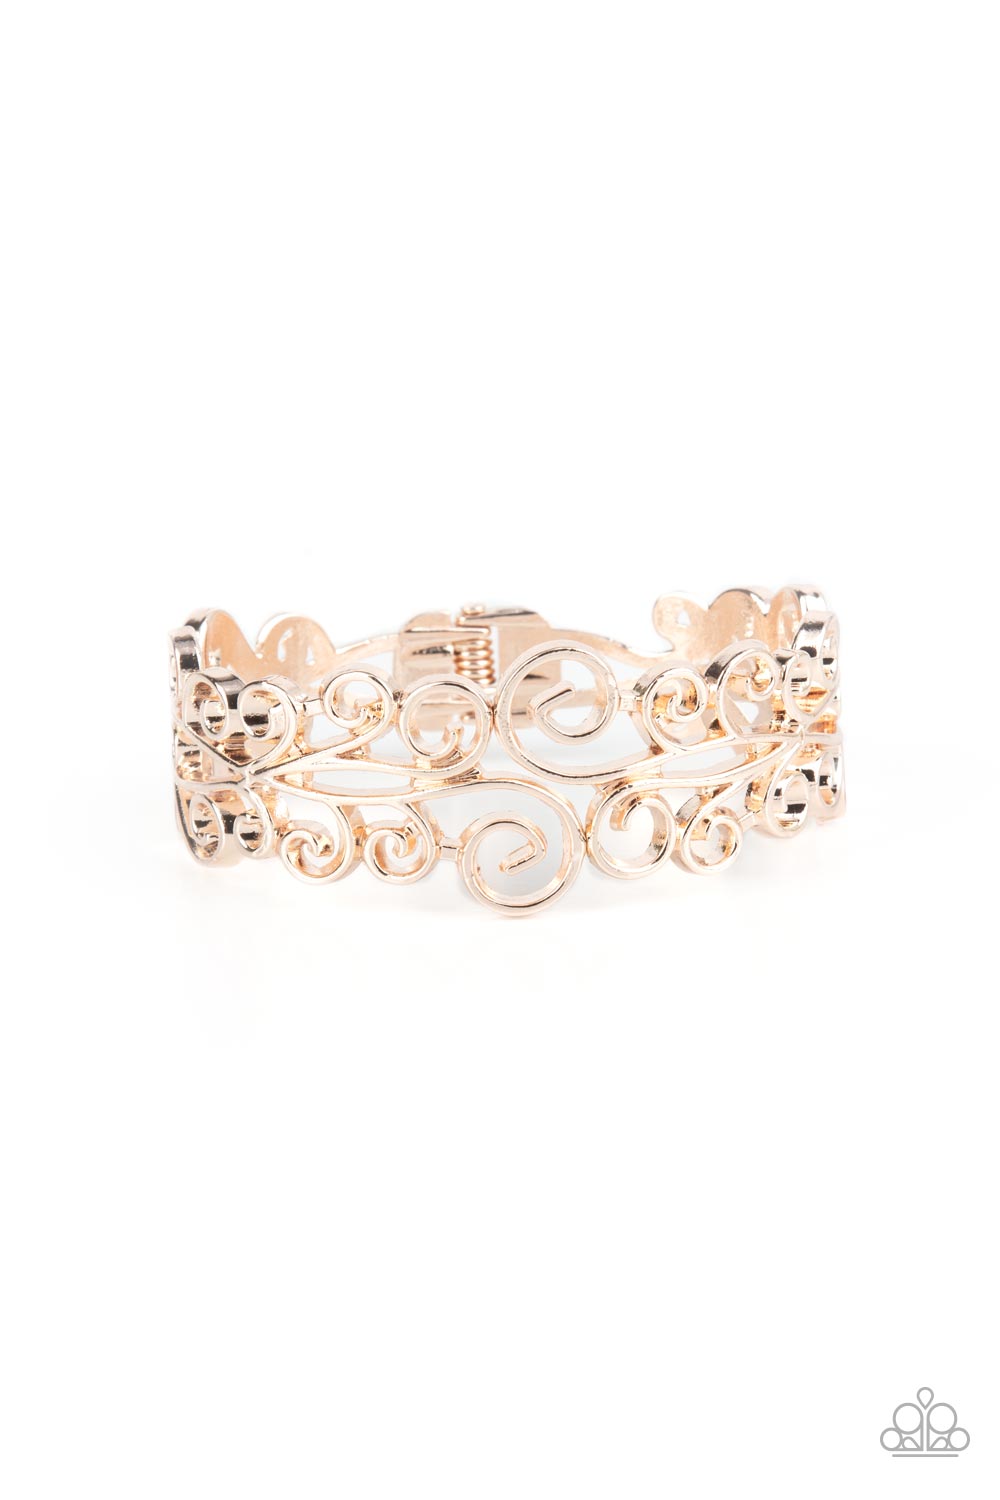 Dressed to FRILL Rose Gold Bracelet - Paparazzi Accessories- lightbox - CarasShop.com - $5 Jewelry by Cara Jewels